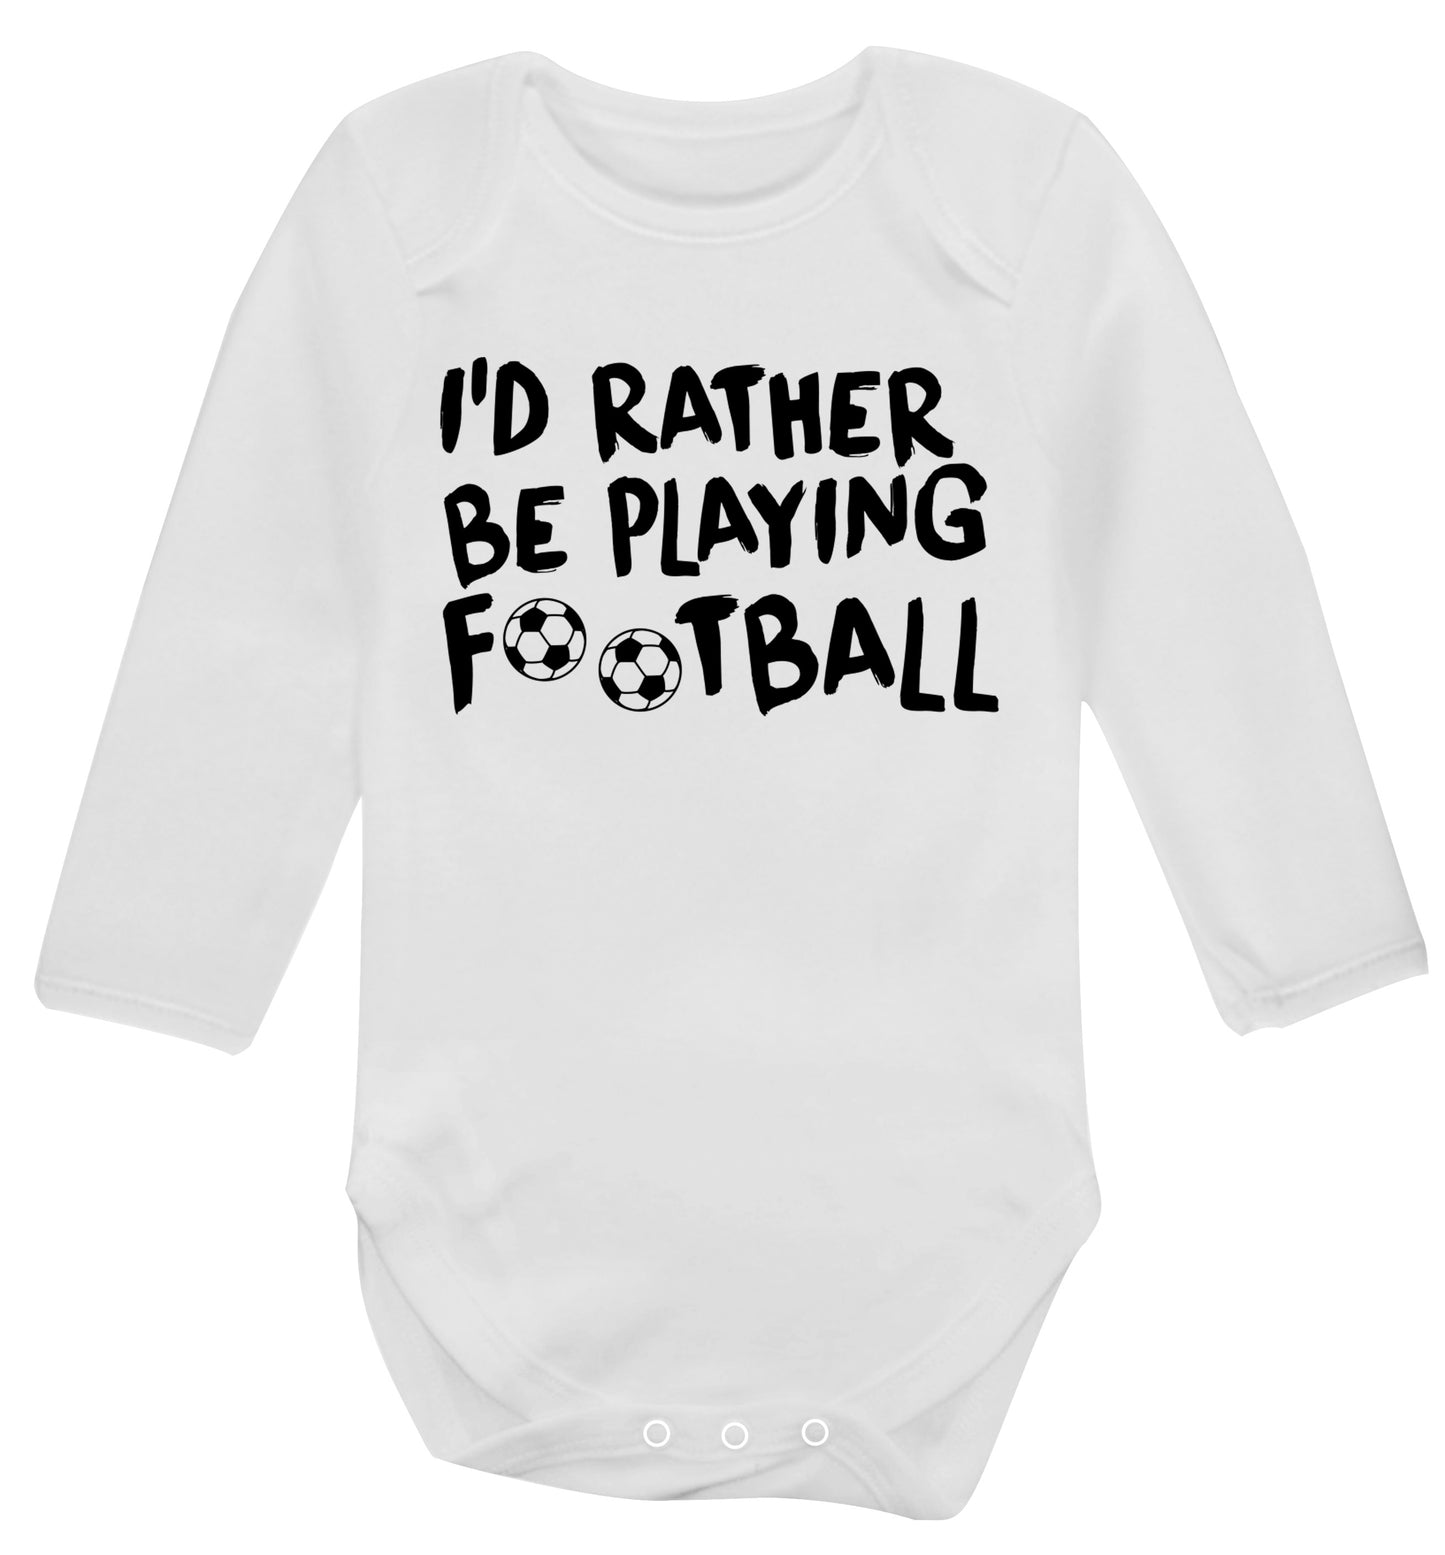 I'd rather be playing football Baby Vest long sleeved white 6-12 months